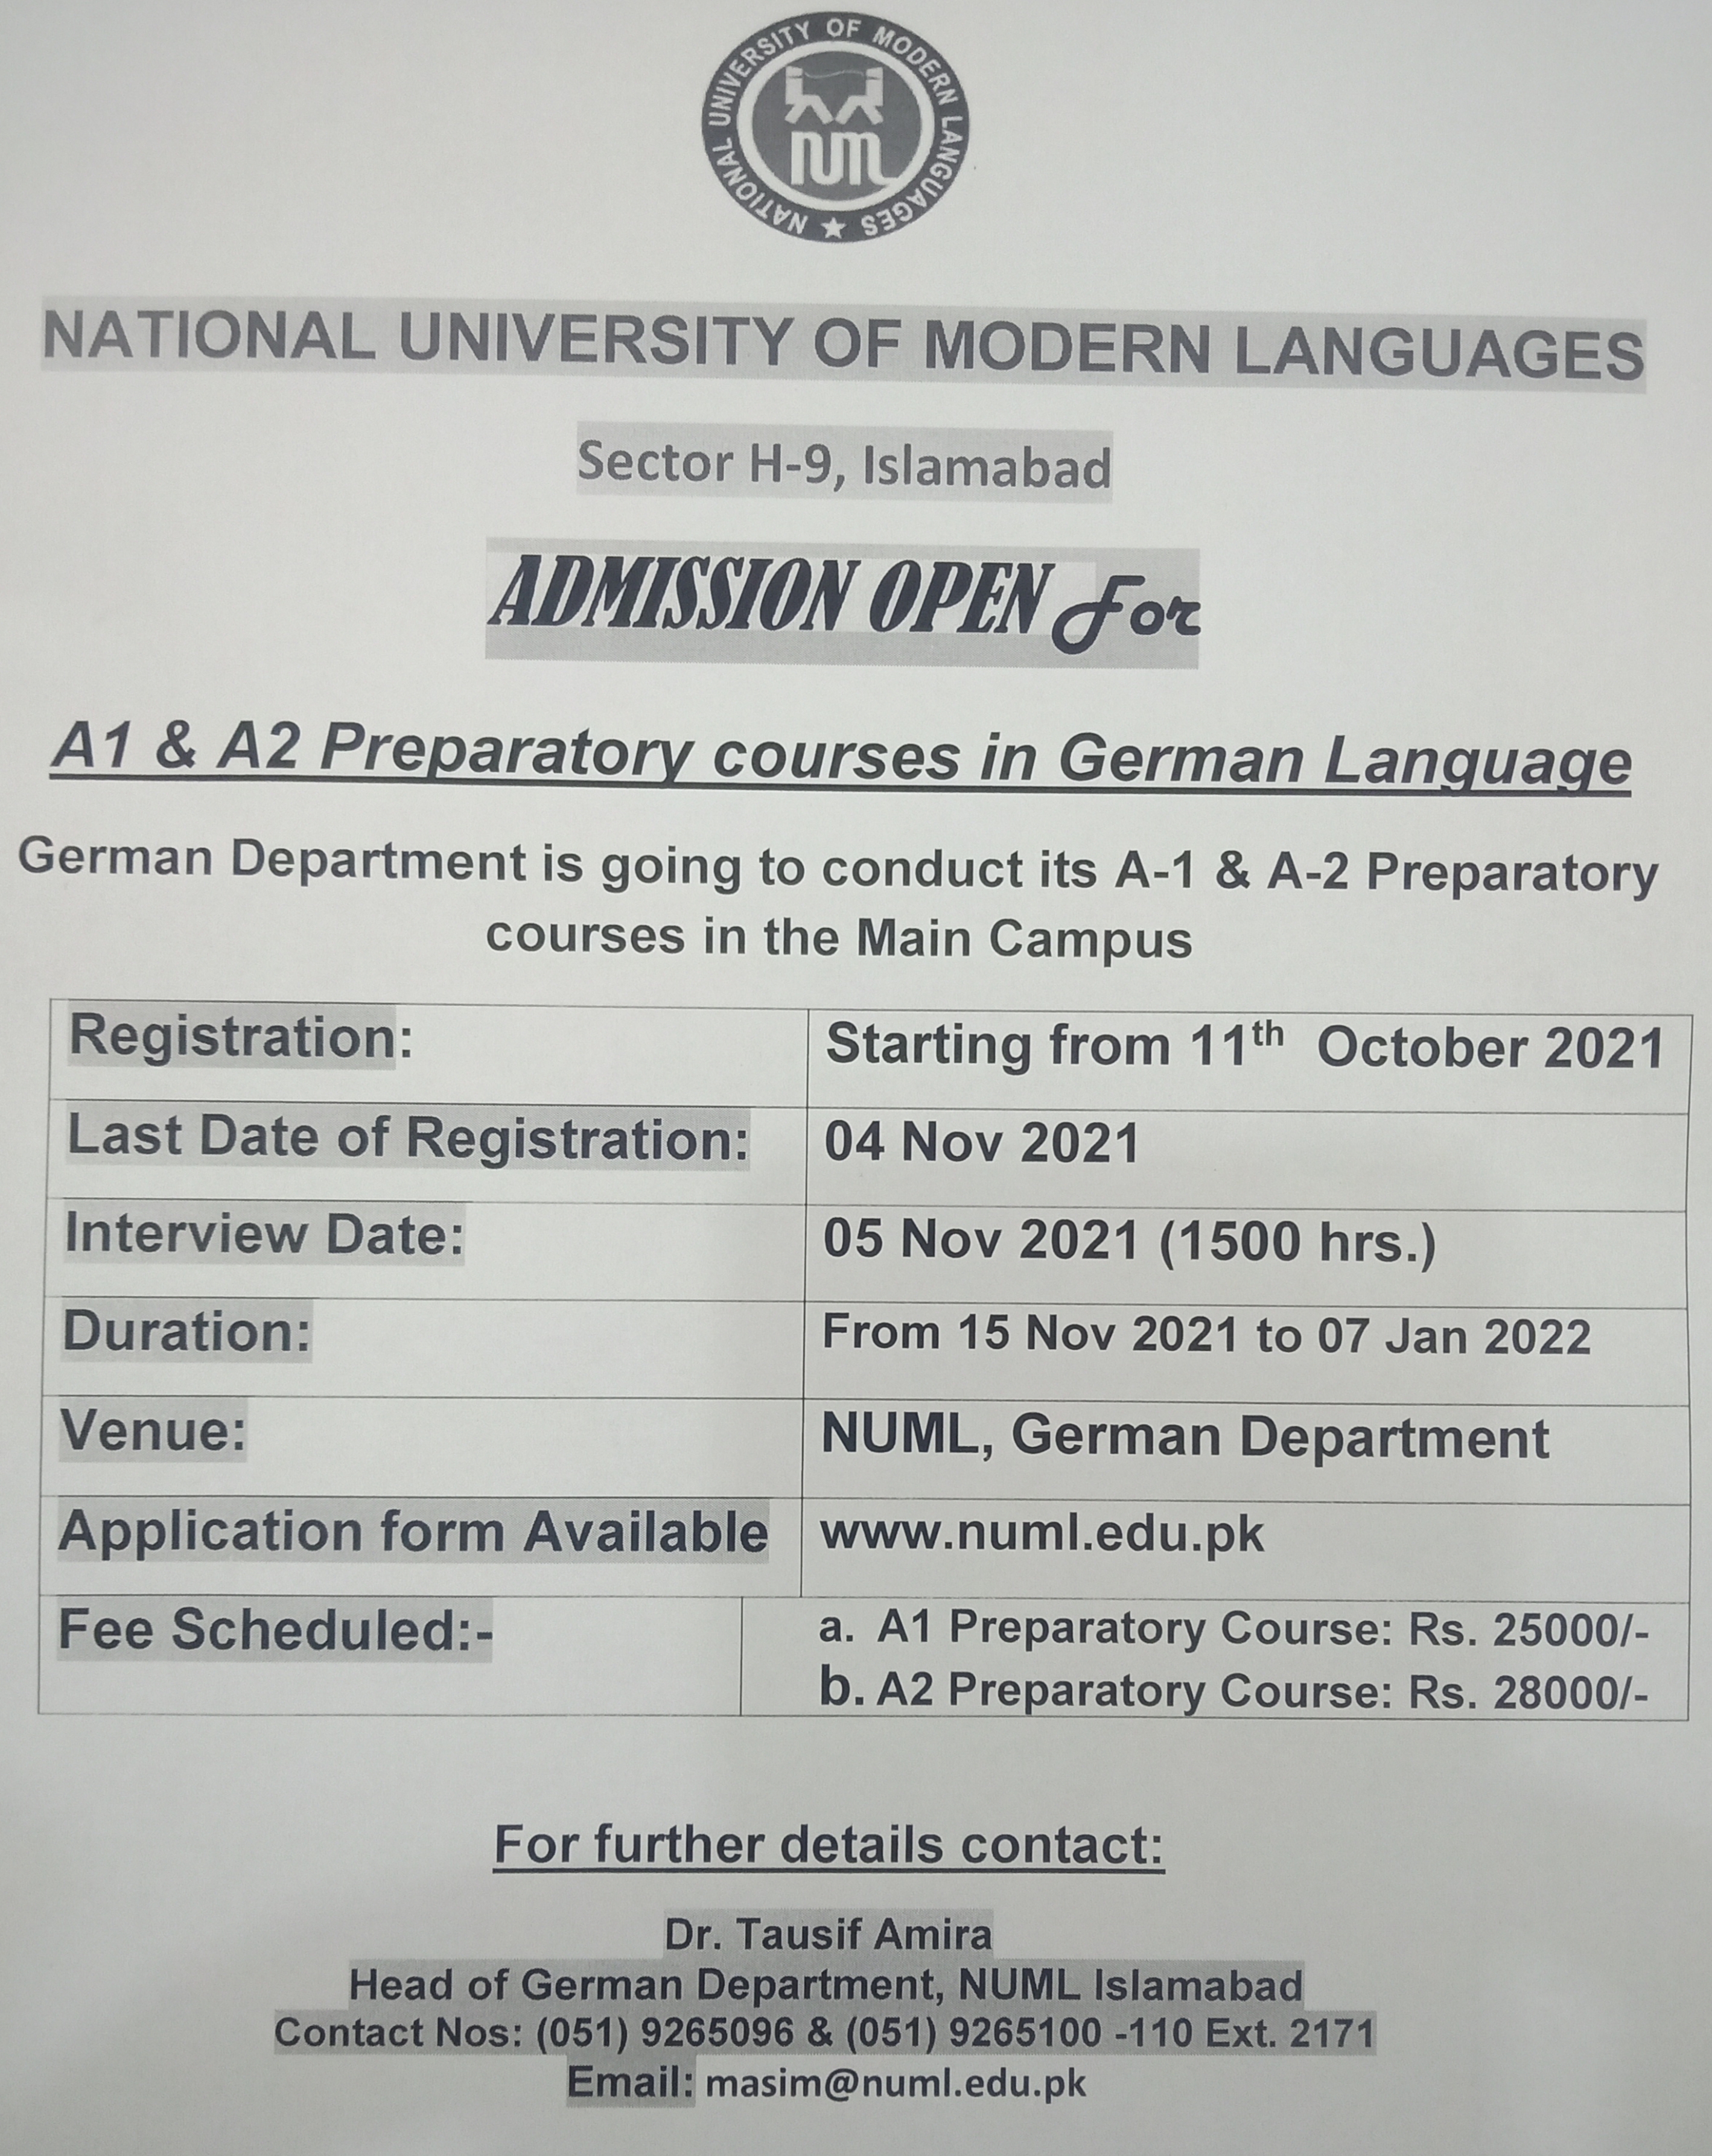 ADMISSION OPEN For A1, A2 Preparatory courses in German Language